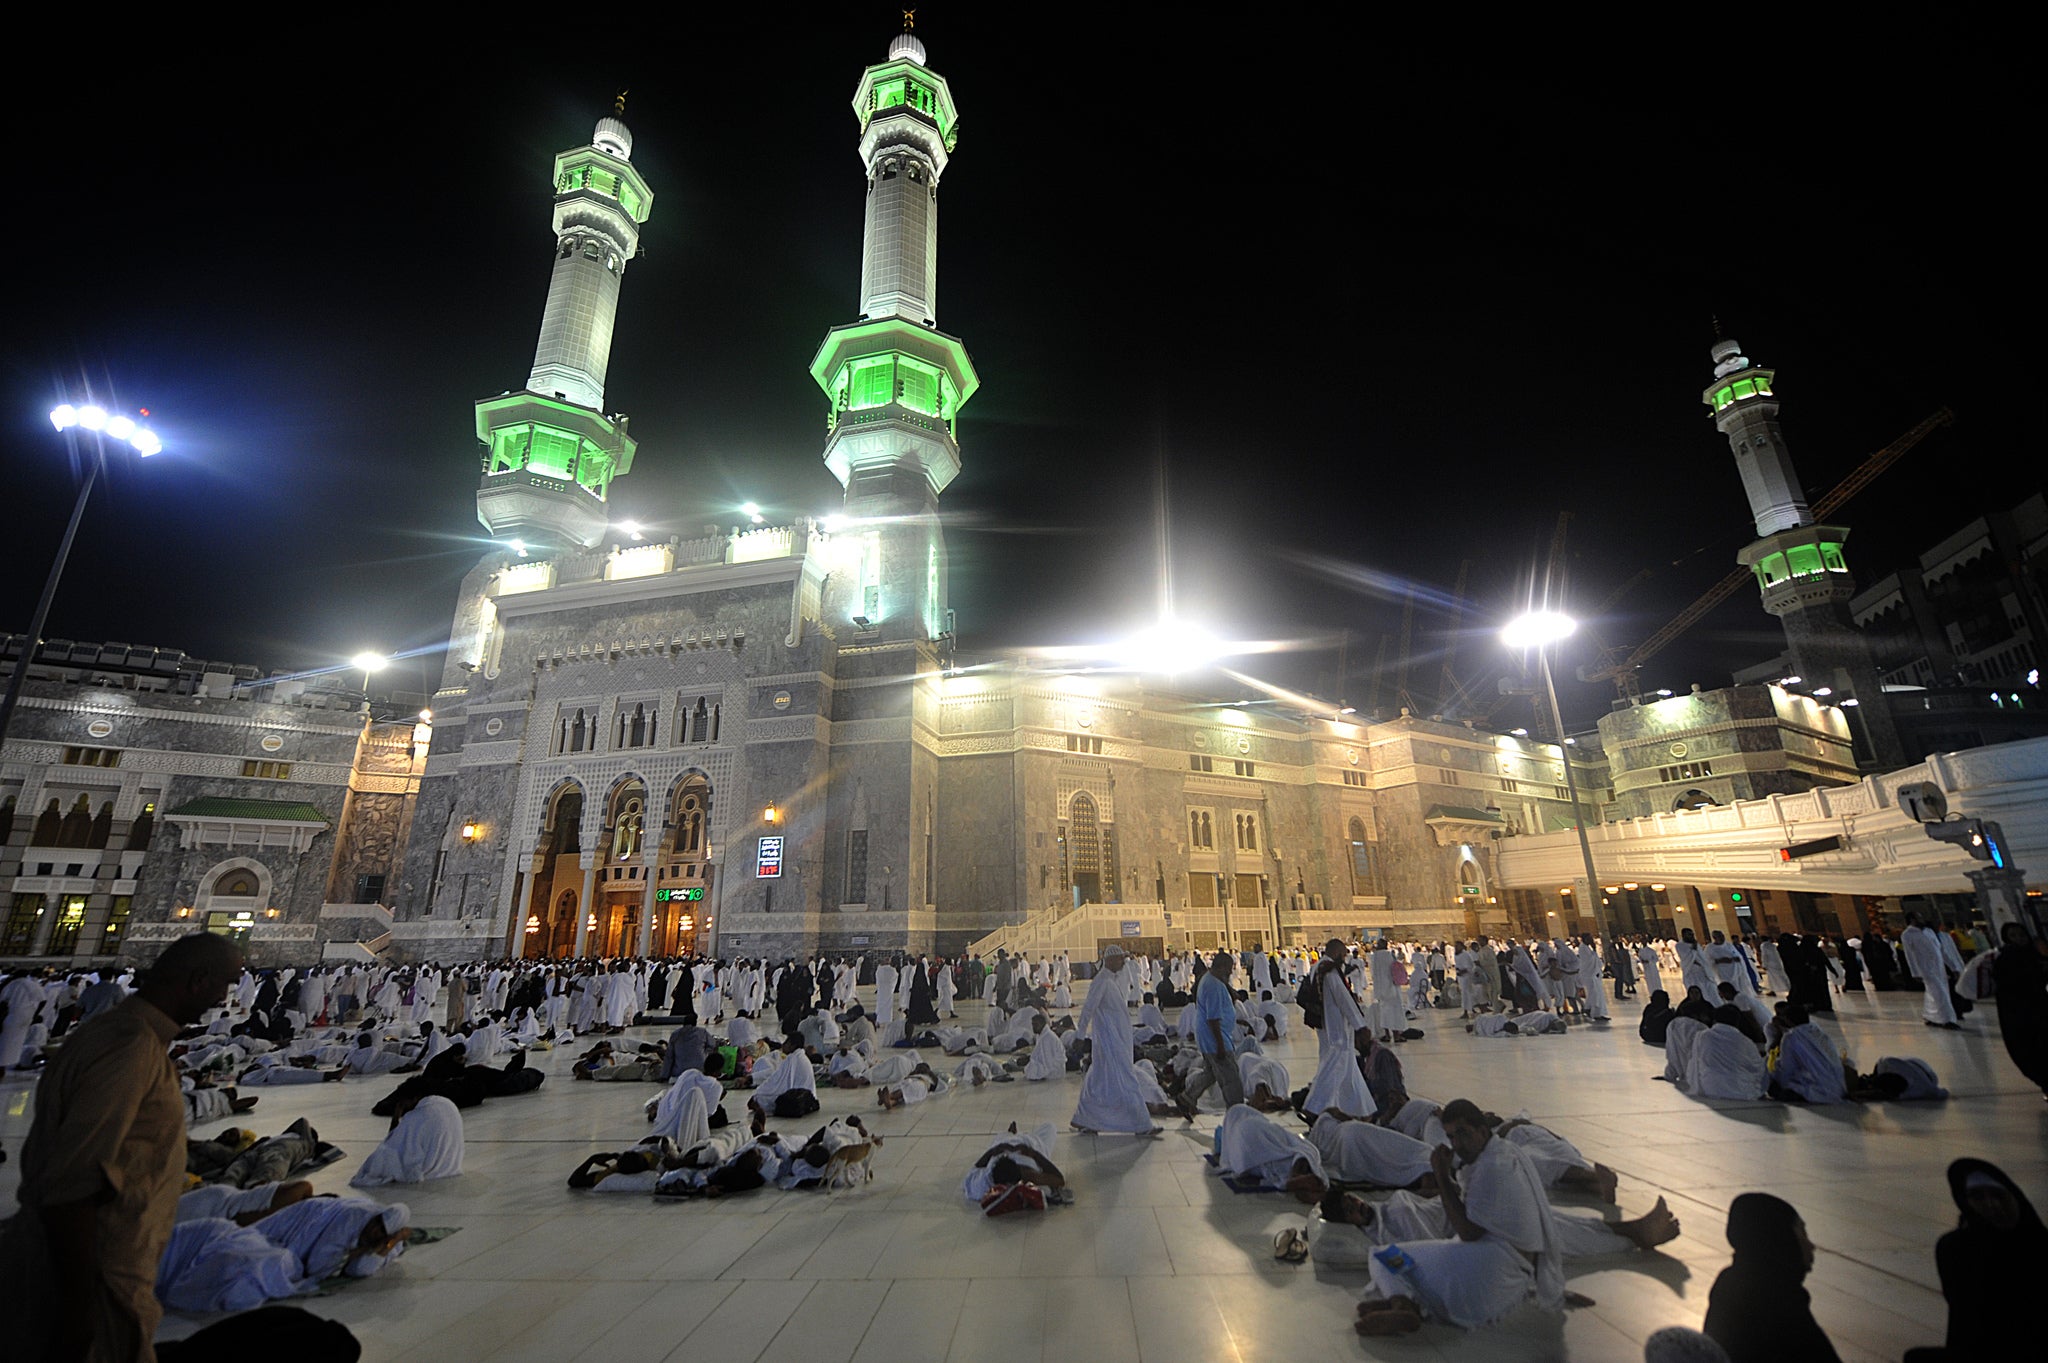 Pilgrim divides opinion as he takes ‘hoverboard’ to Mecca